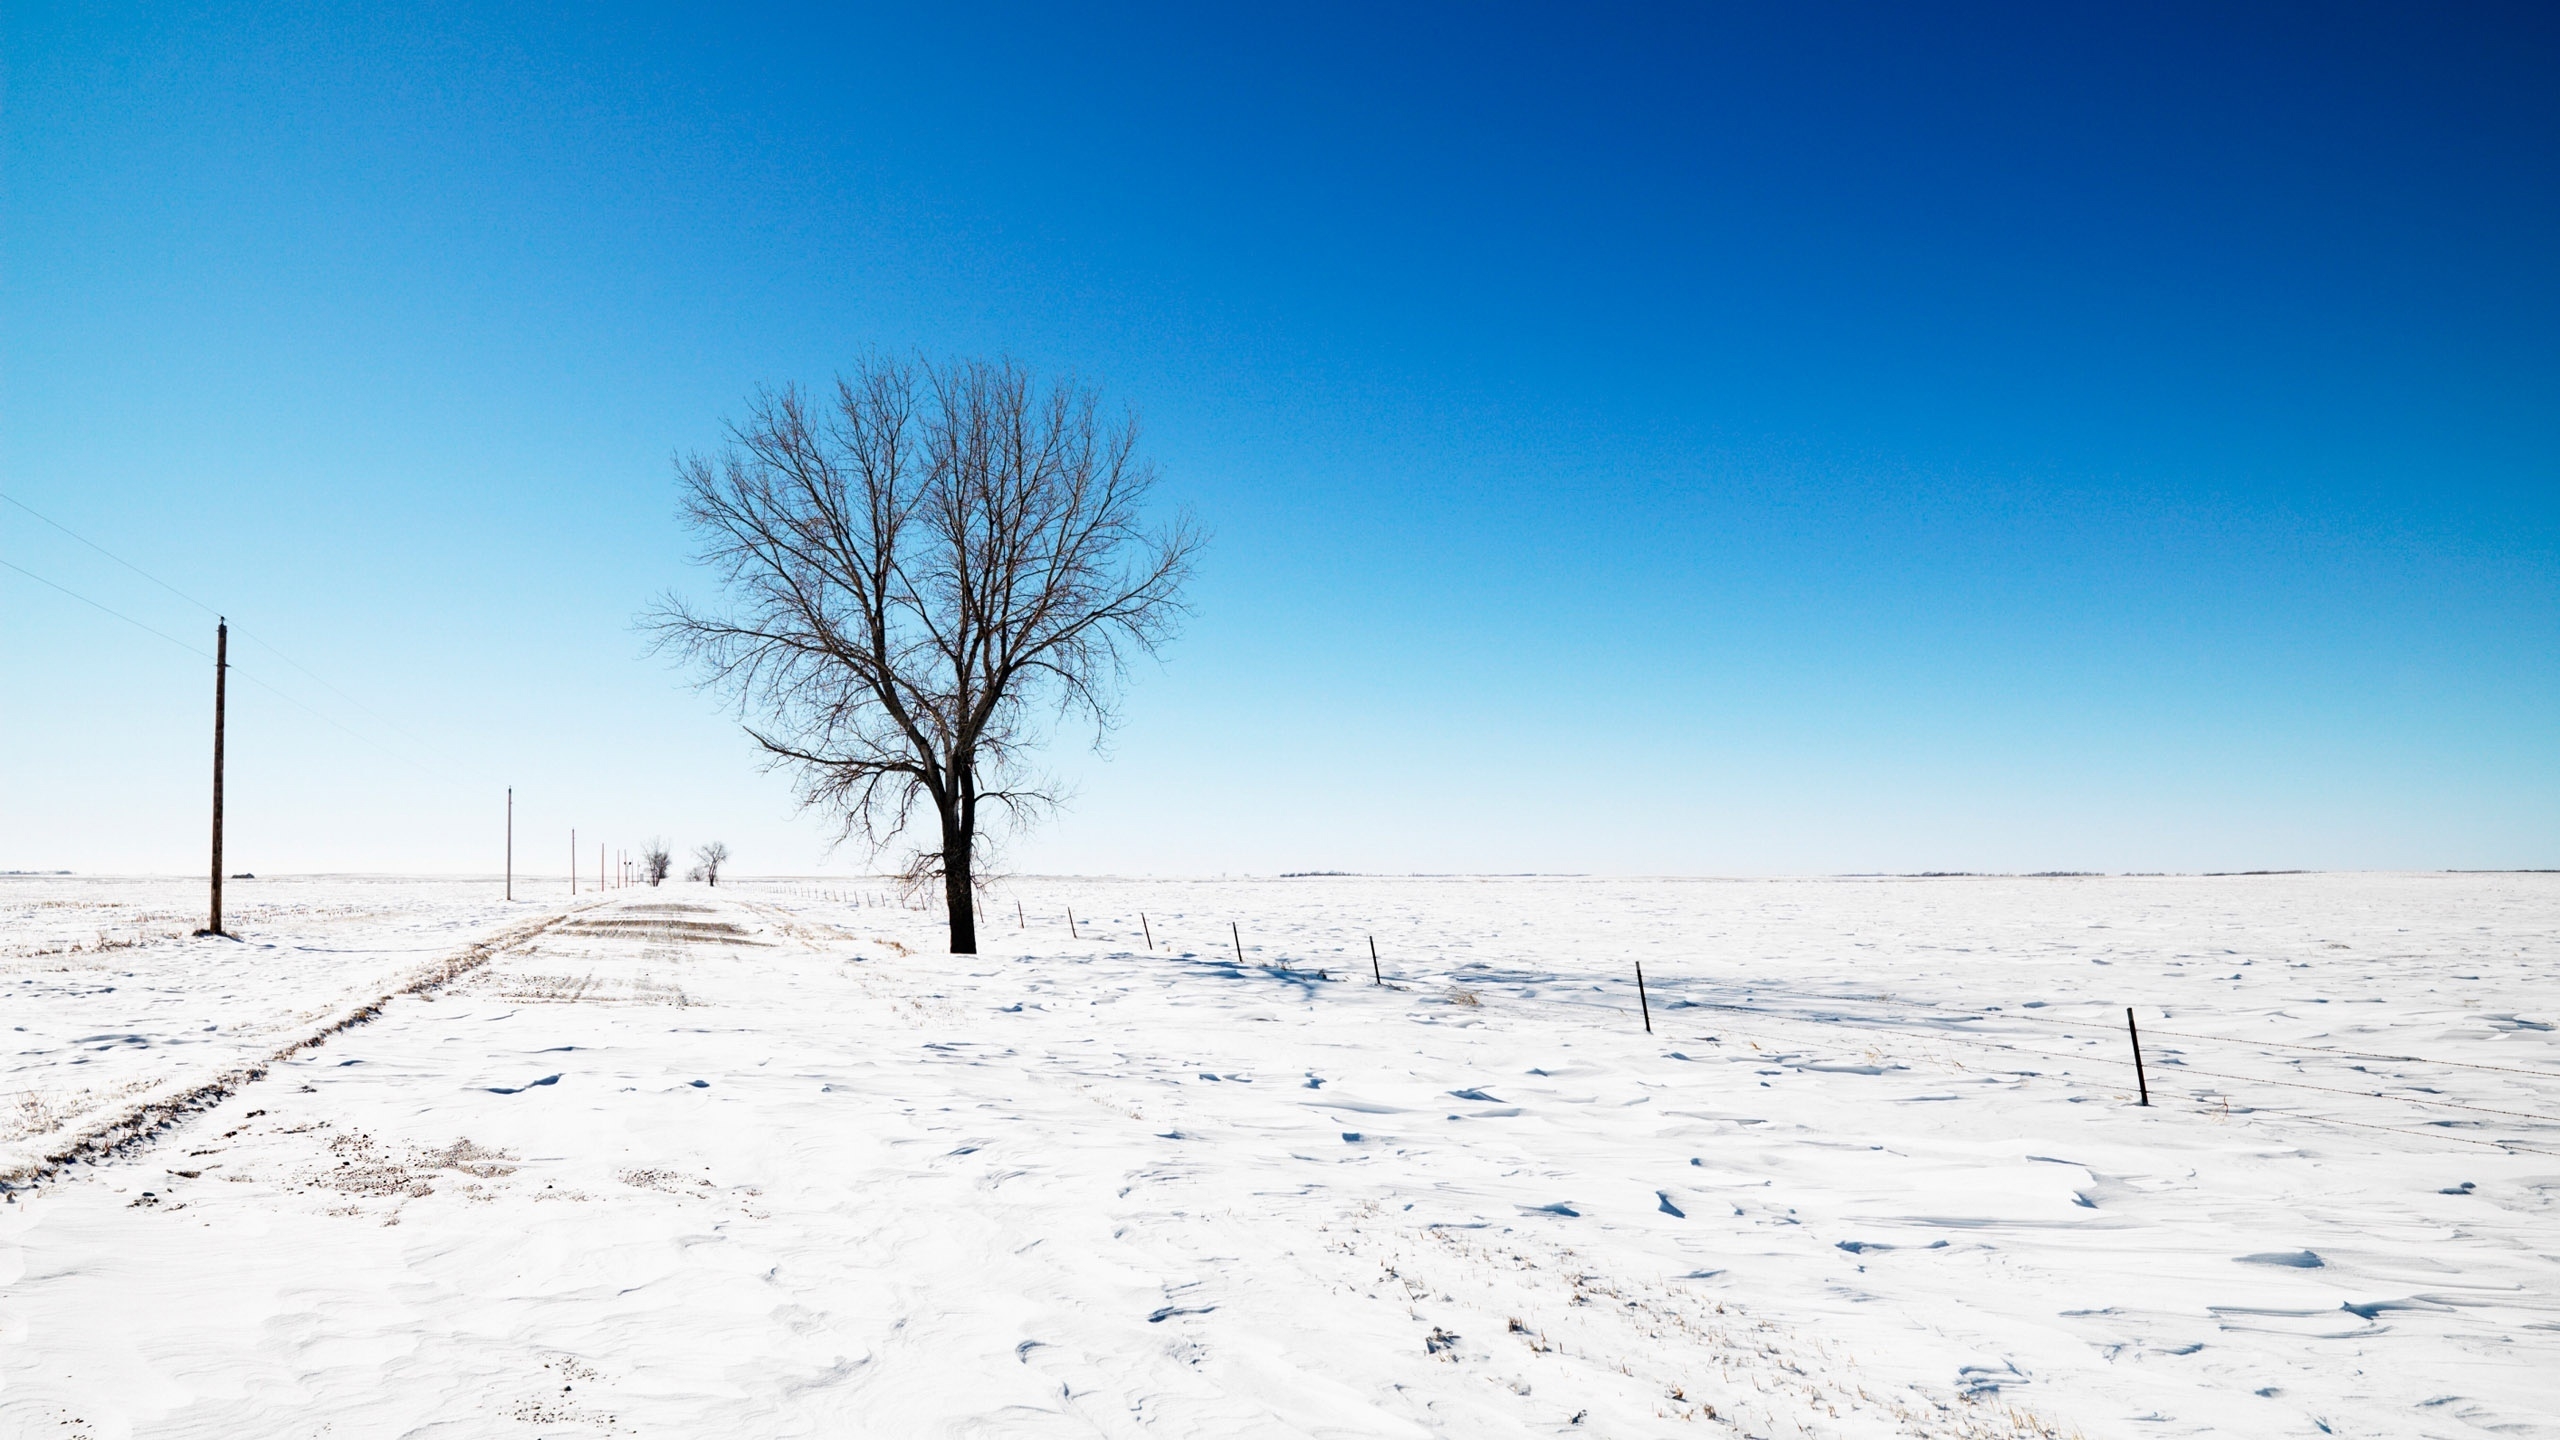 Lonely Tree on Winter for 2560x1440 HDTV resolution